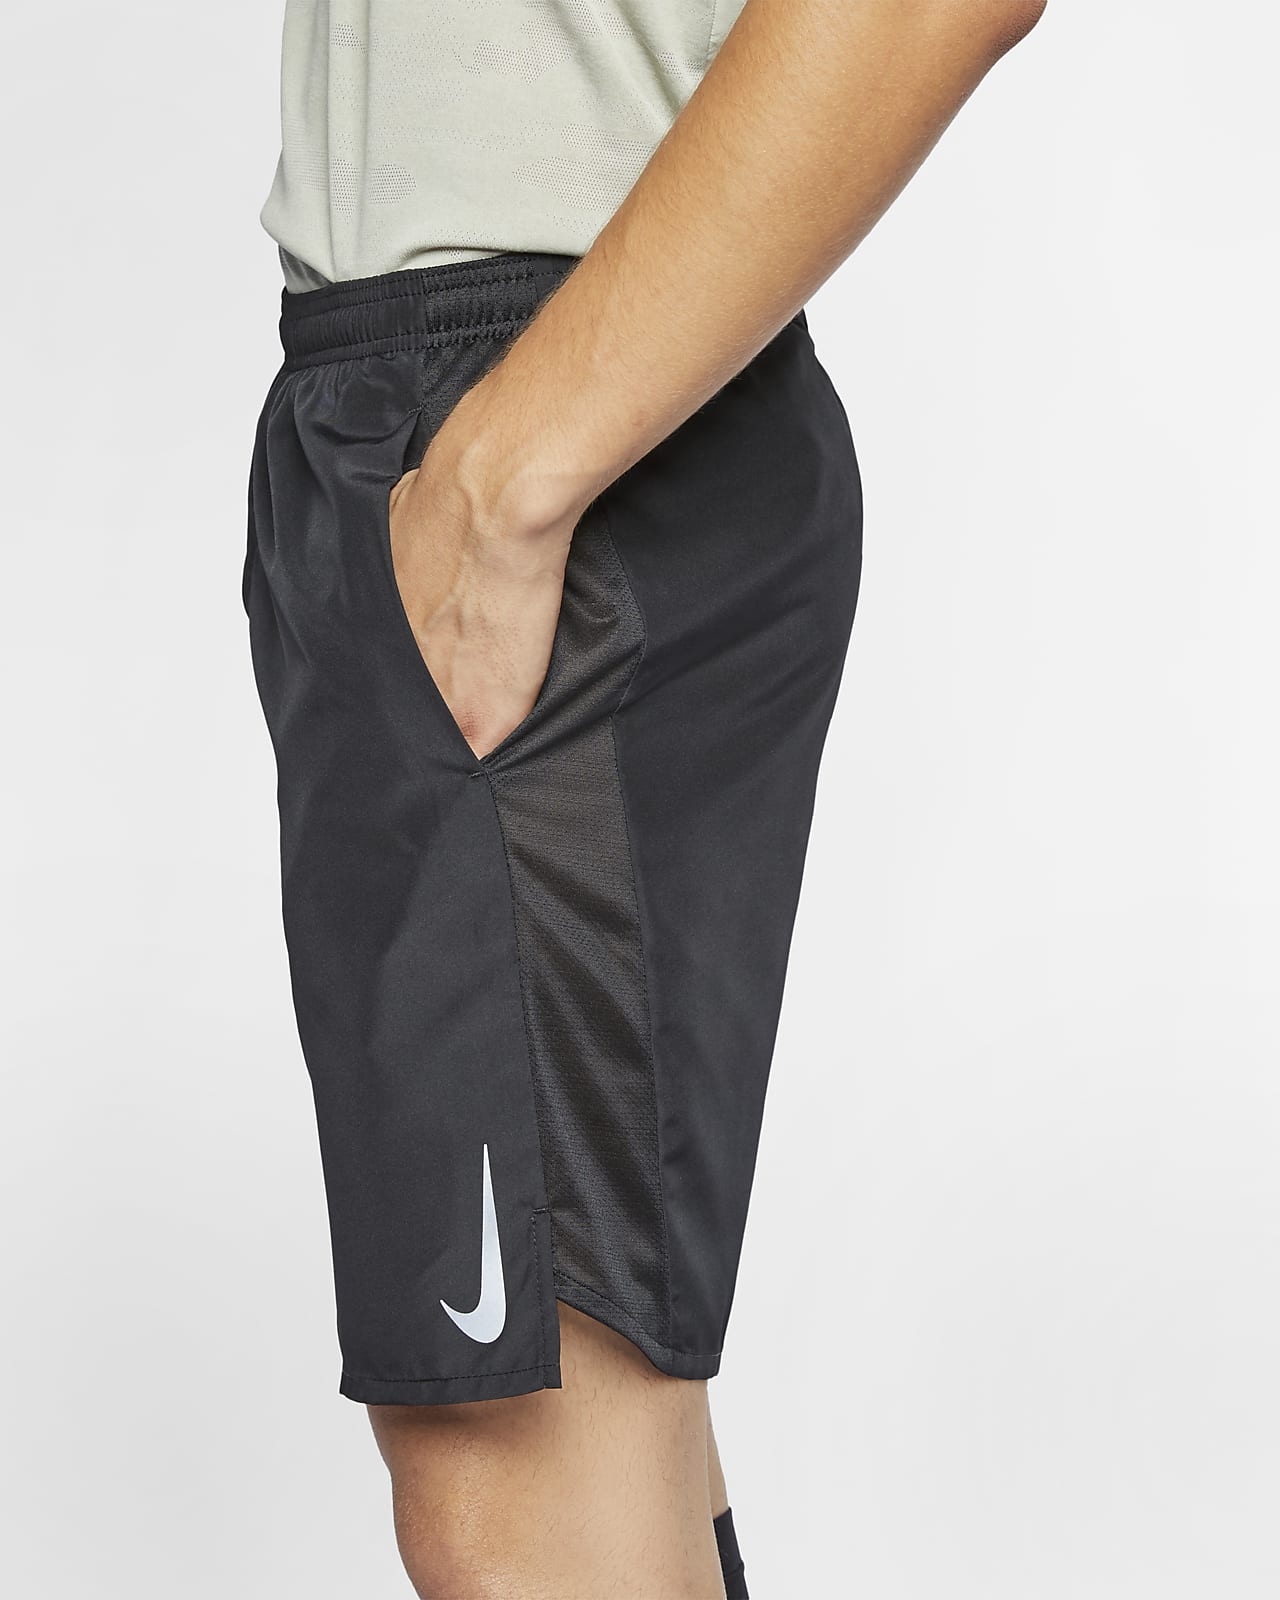 above the knee nike shorts